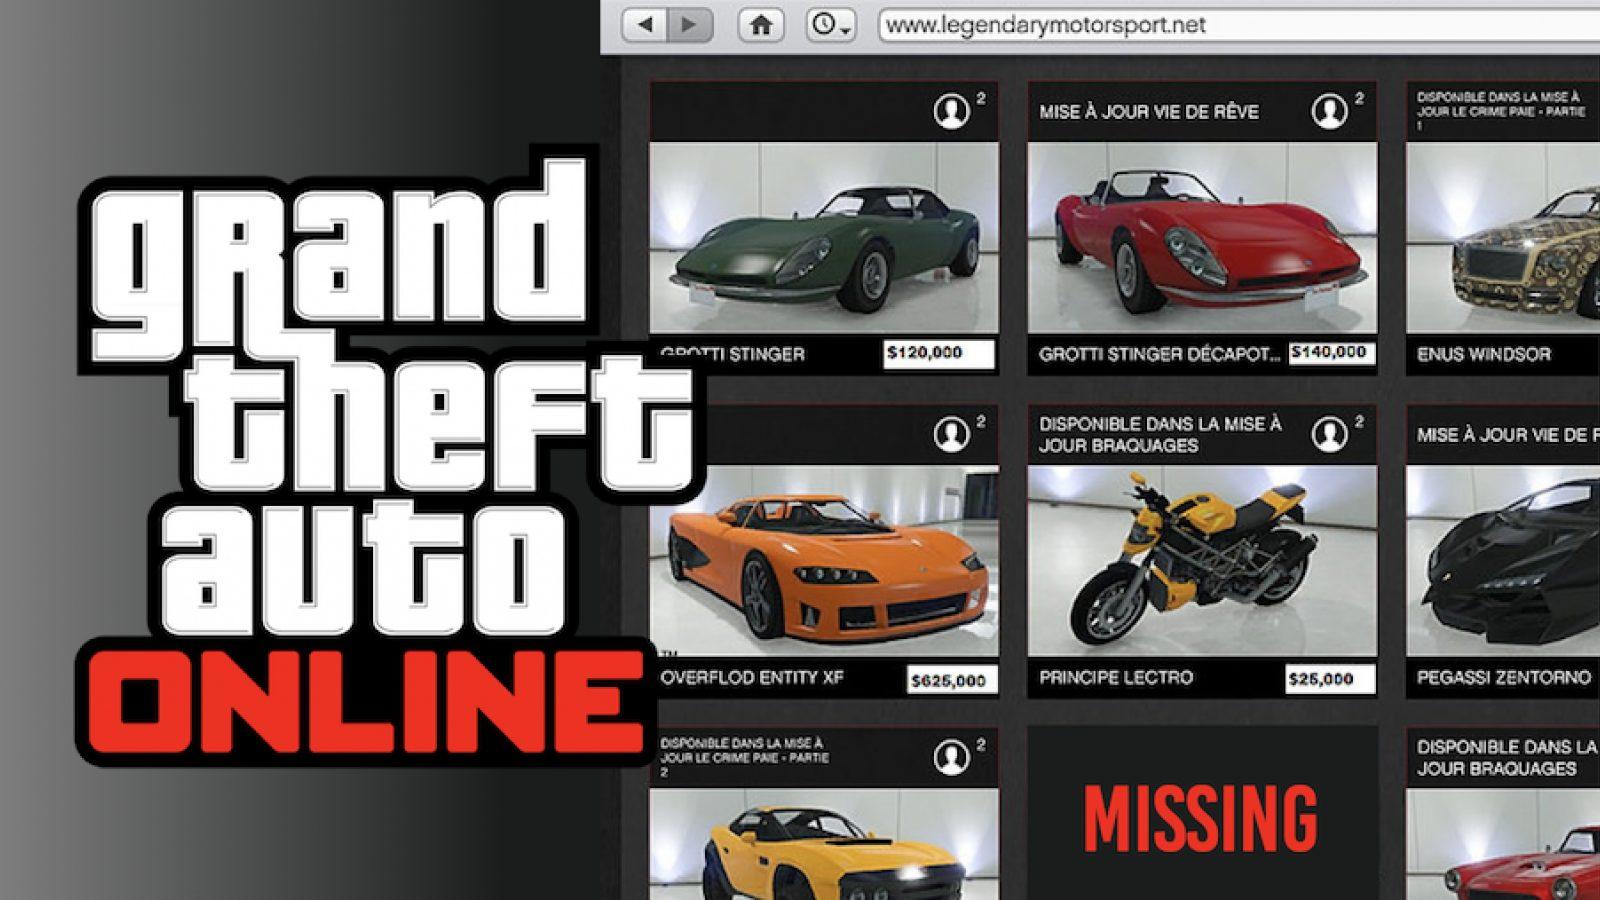 This is Vice Online, a kind of free GTA Online for mobile devices